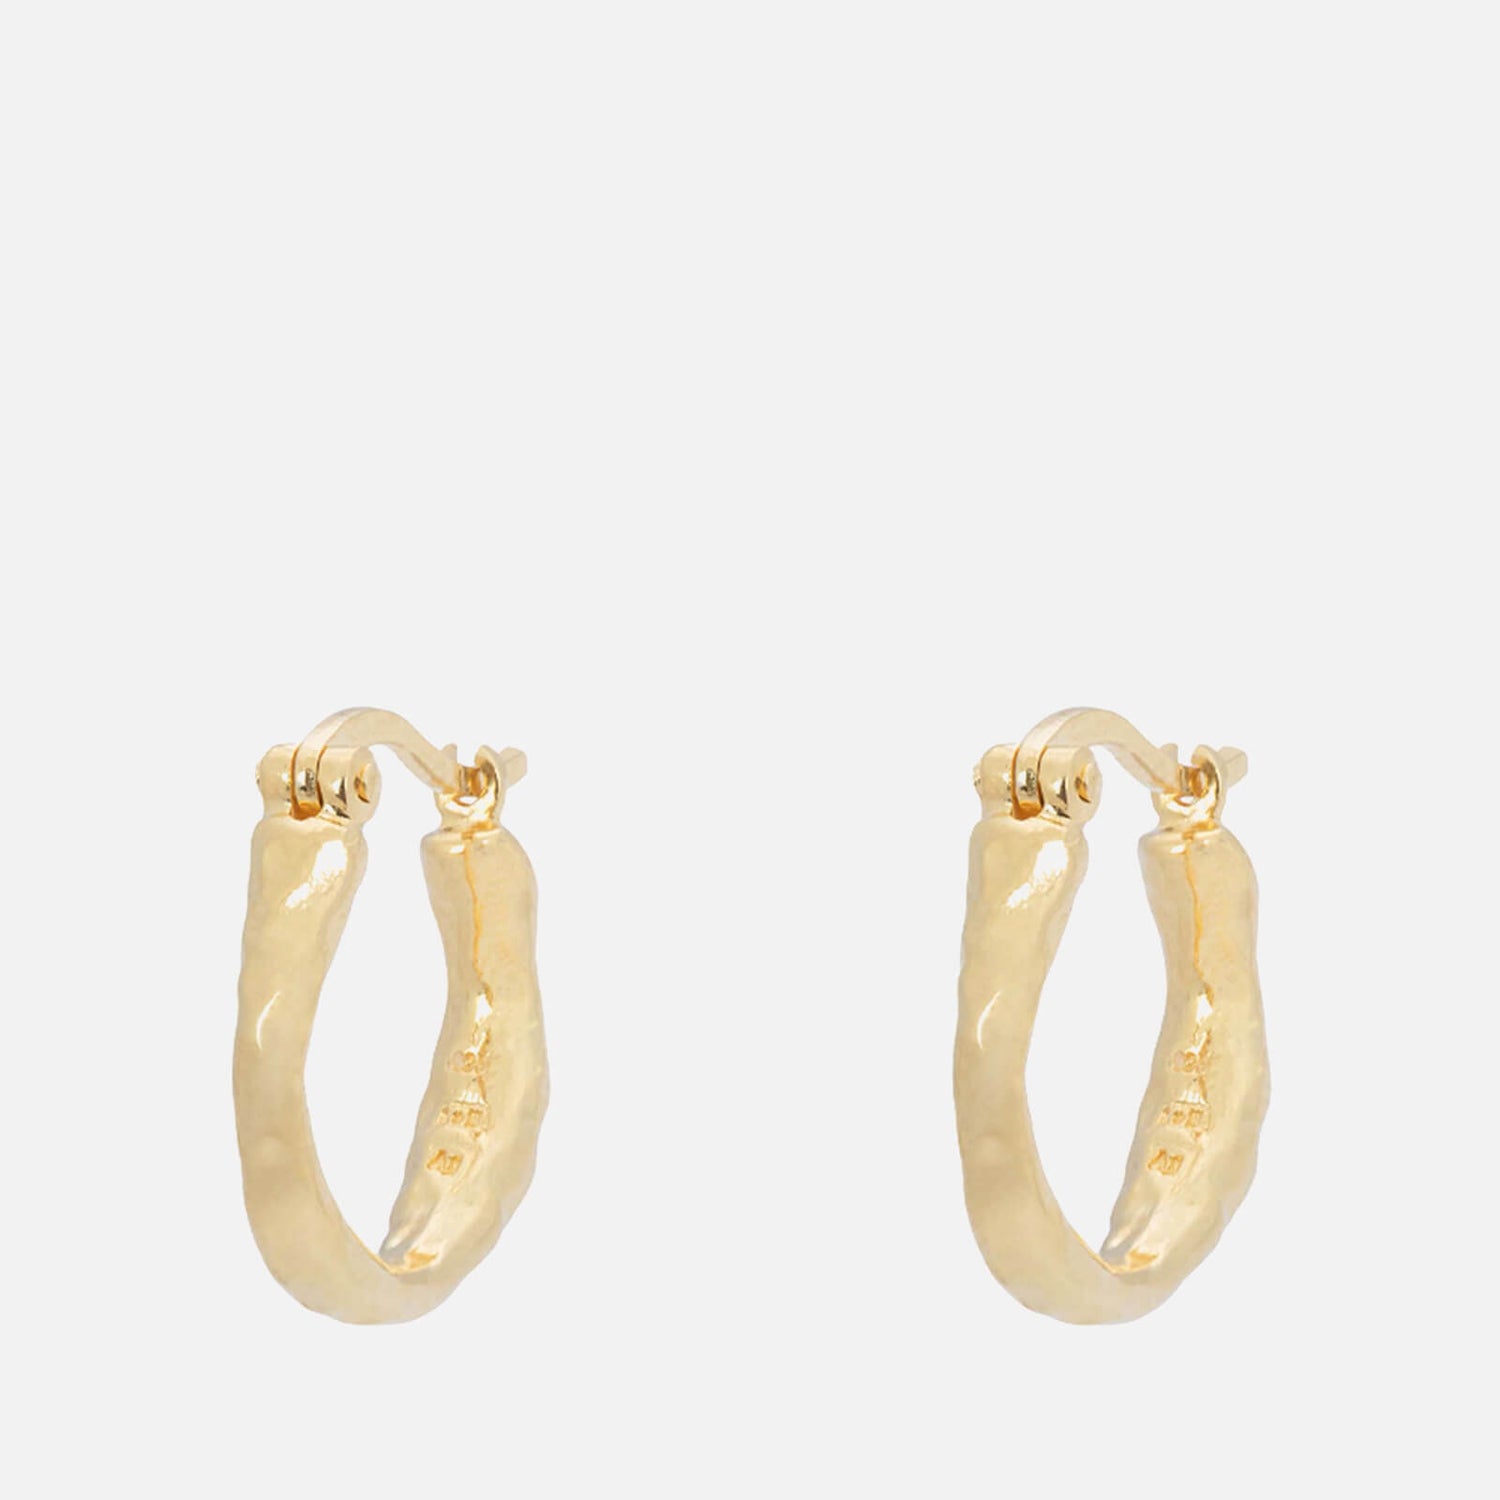 anna + nina Small Organic Gold-Plated Sterling Silver Hoop Earrings